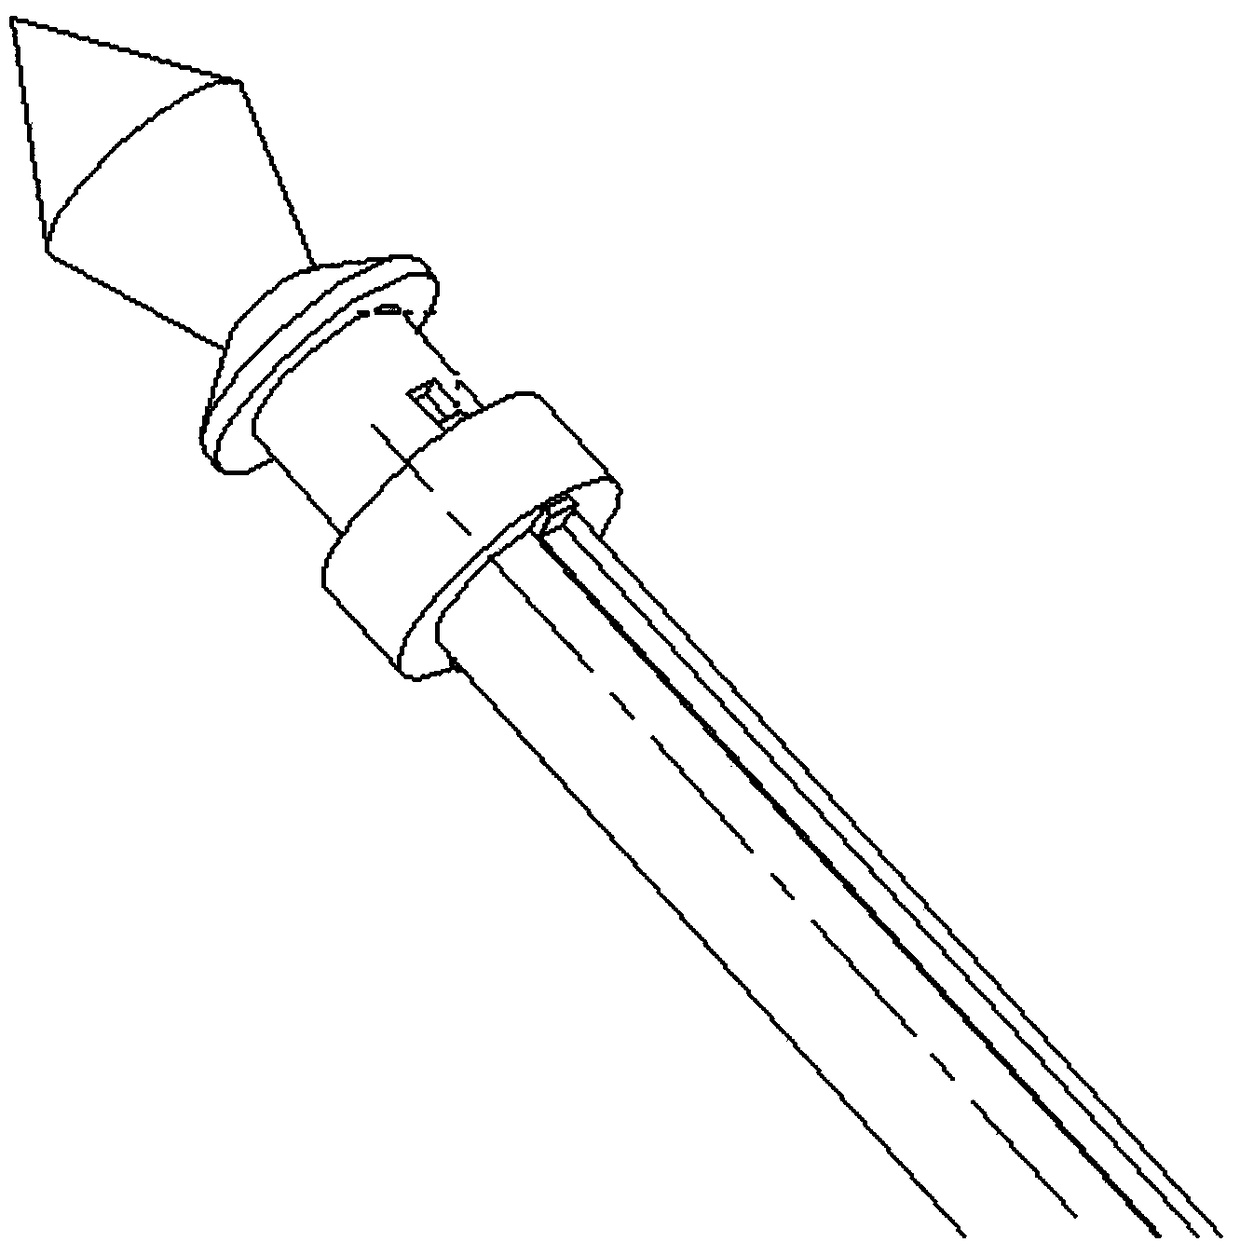 A wire anchor for power communication wiring